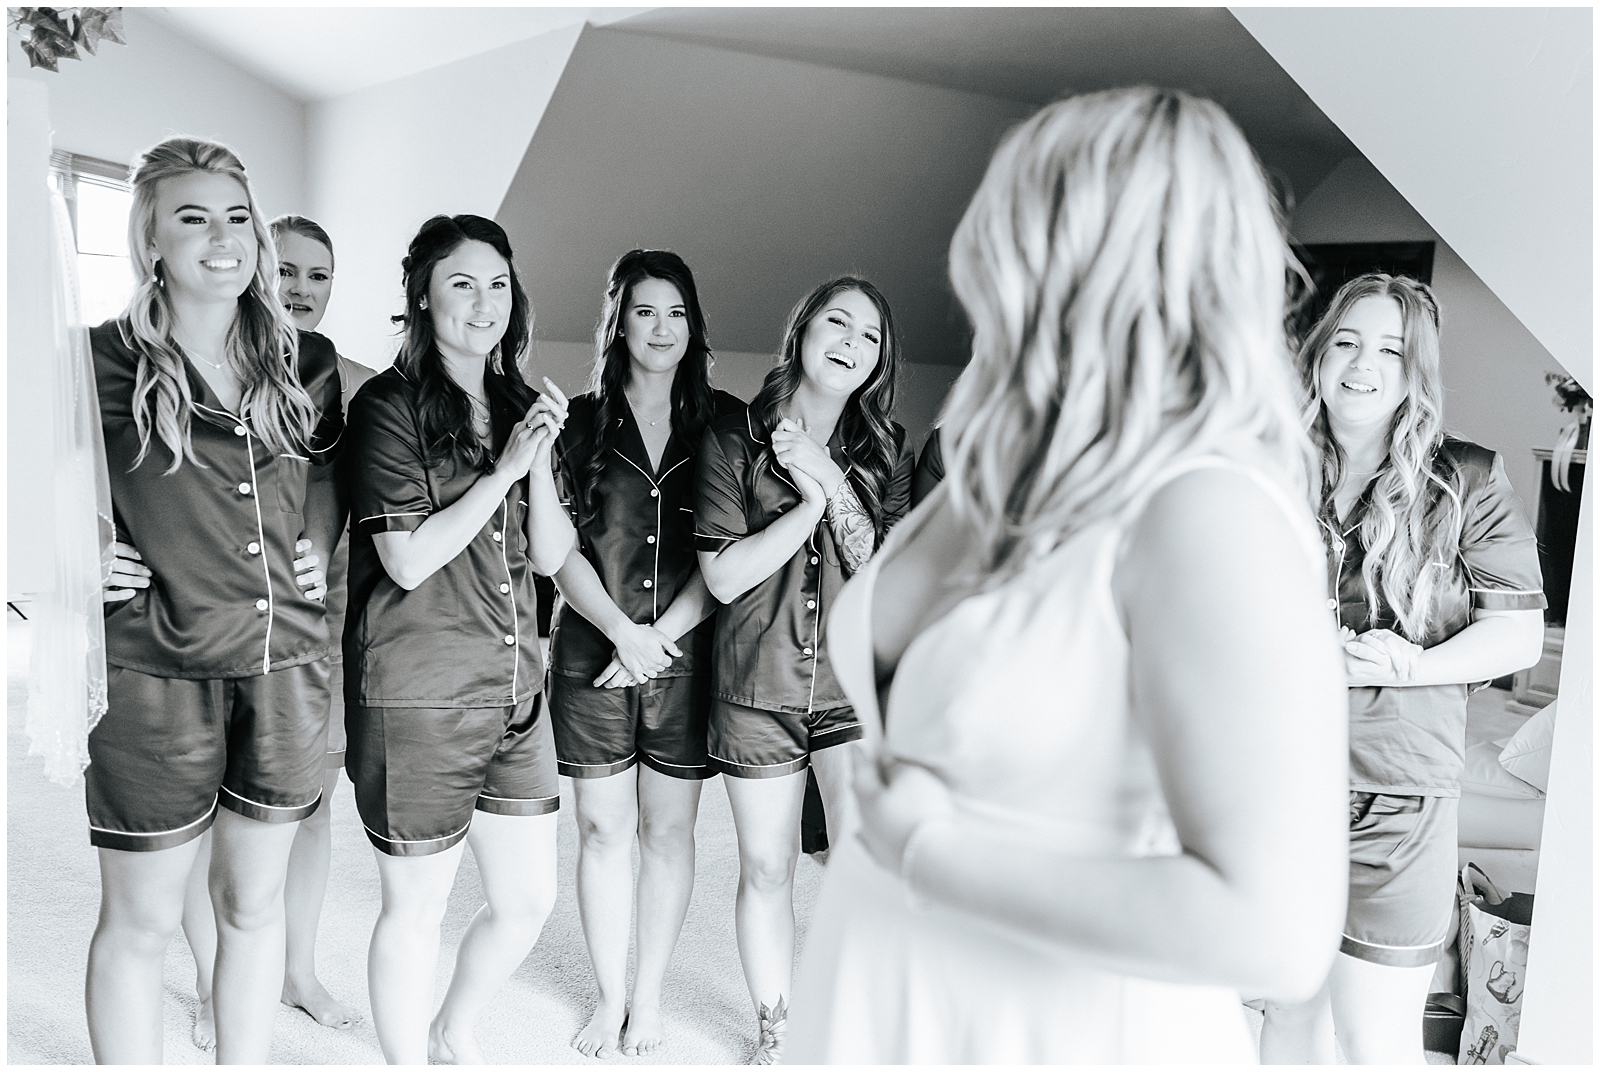 Reveal to the bridesmaids